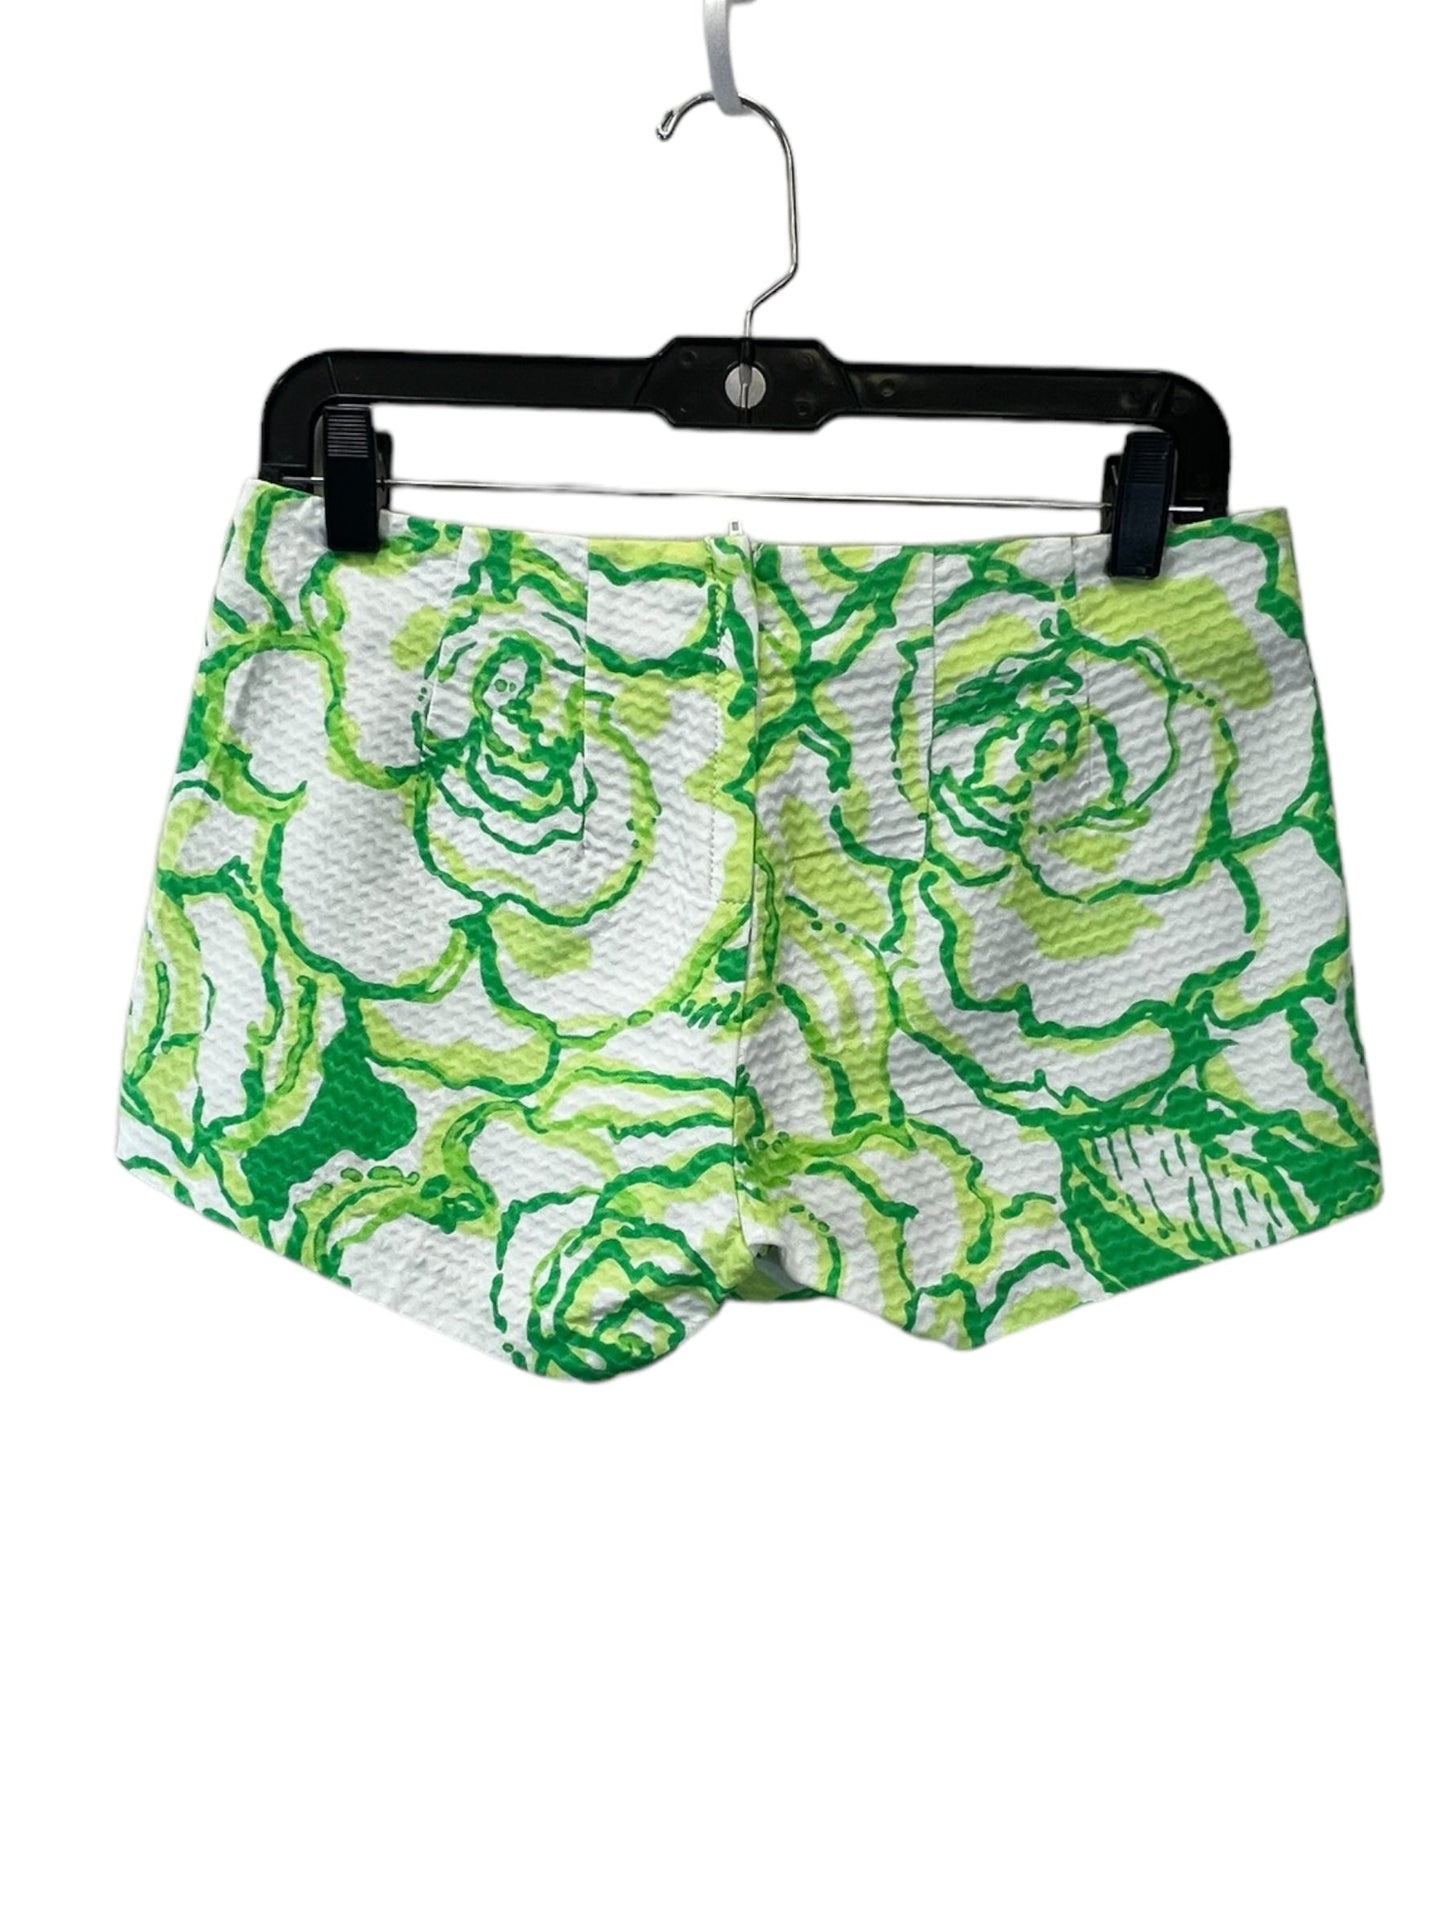 Green & White Shorts Lilly Pulitzer, Size 0